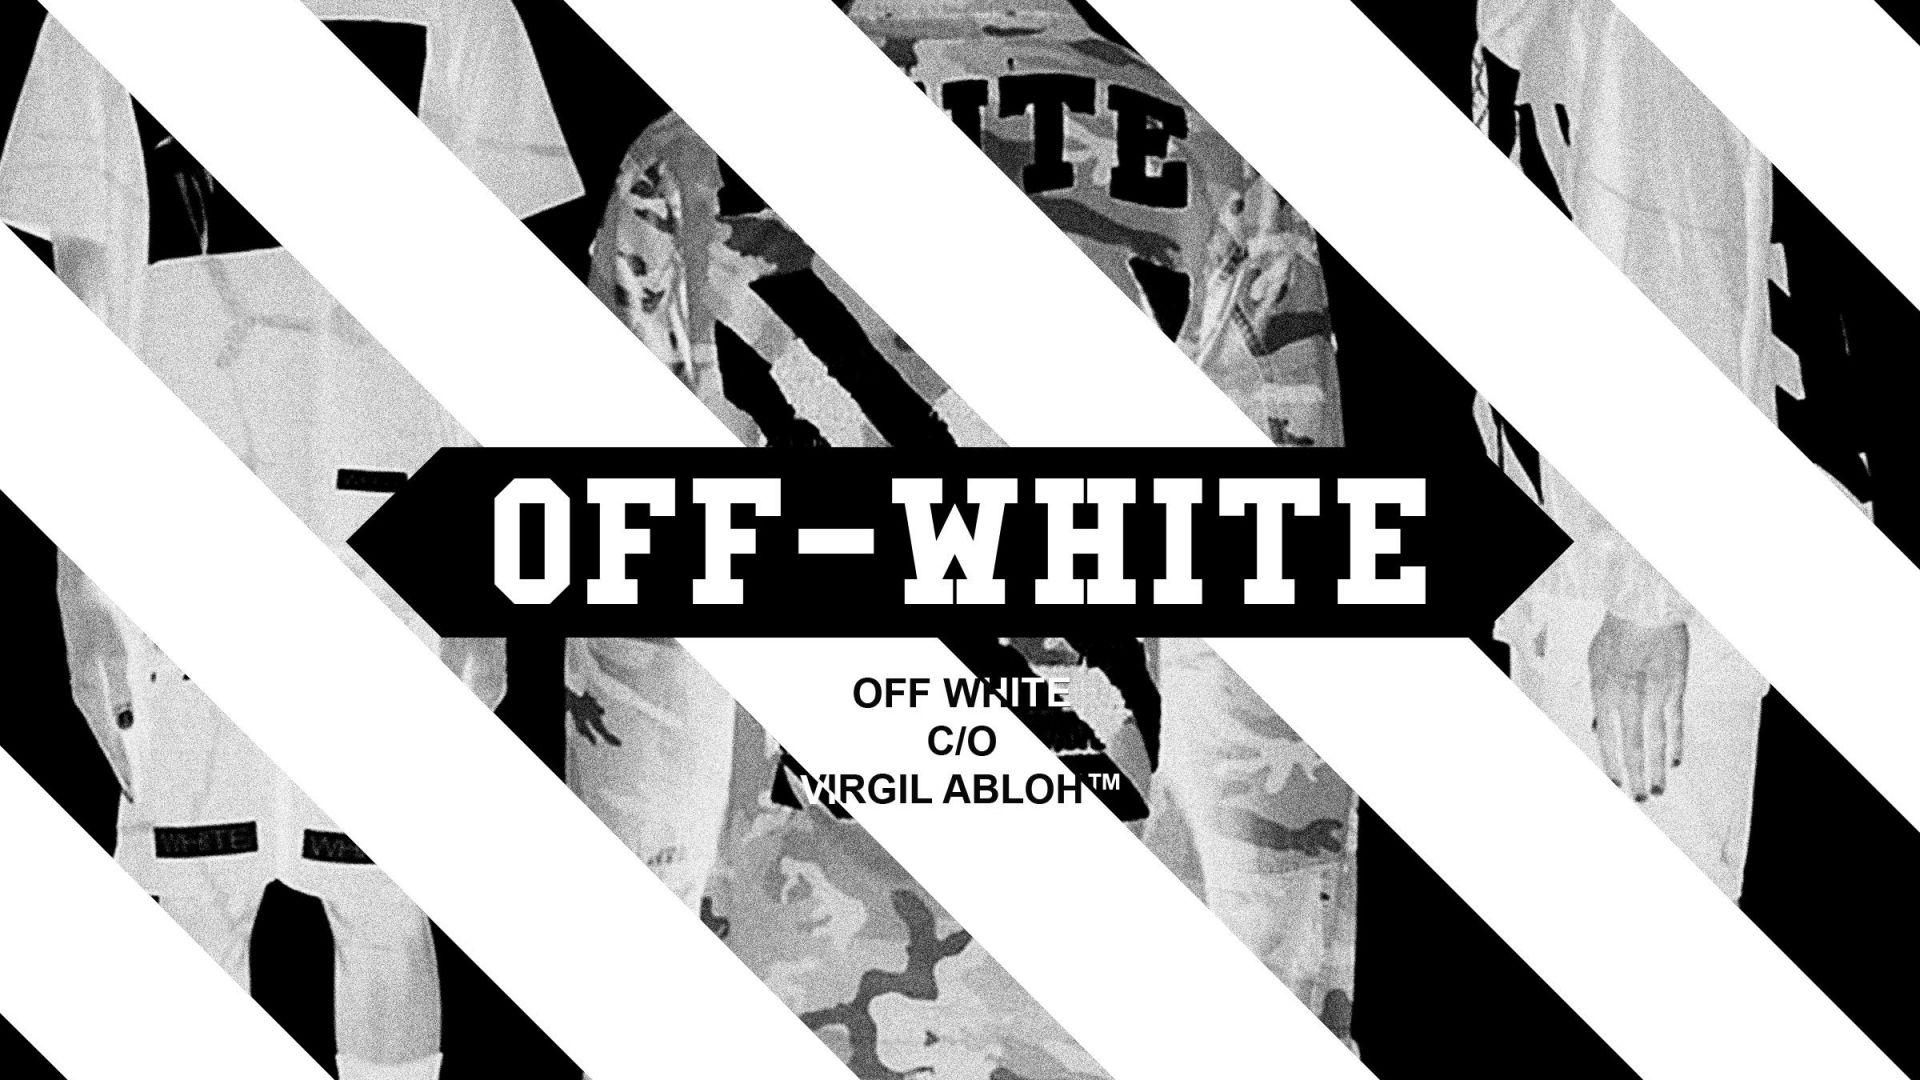 Off-White is a fashion brand that was founded by the famous designer, Virgil Abloh. - Off-White